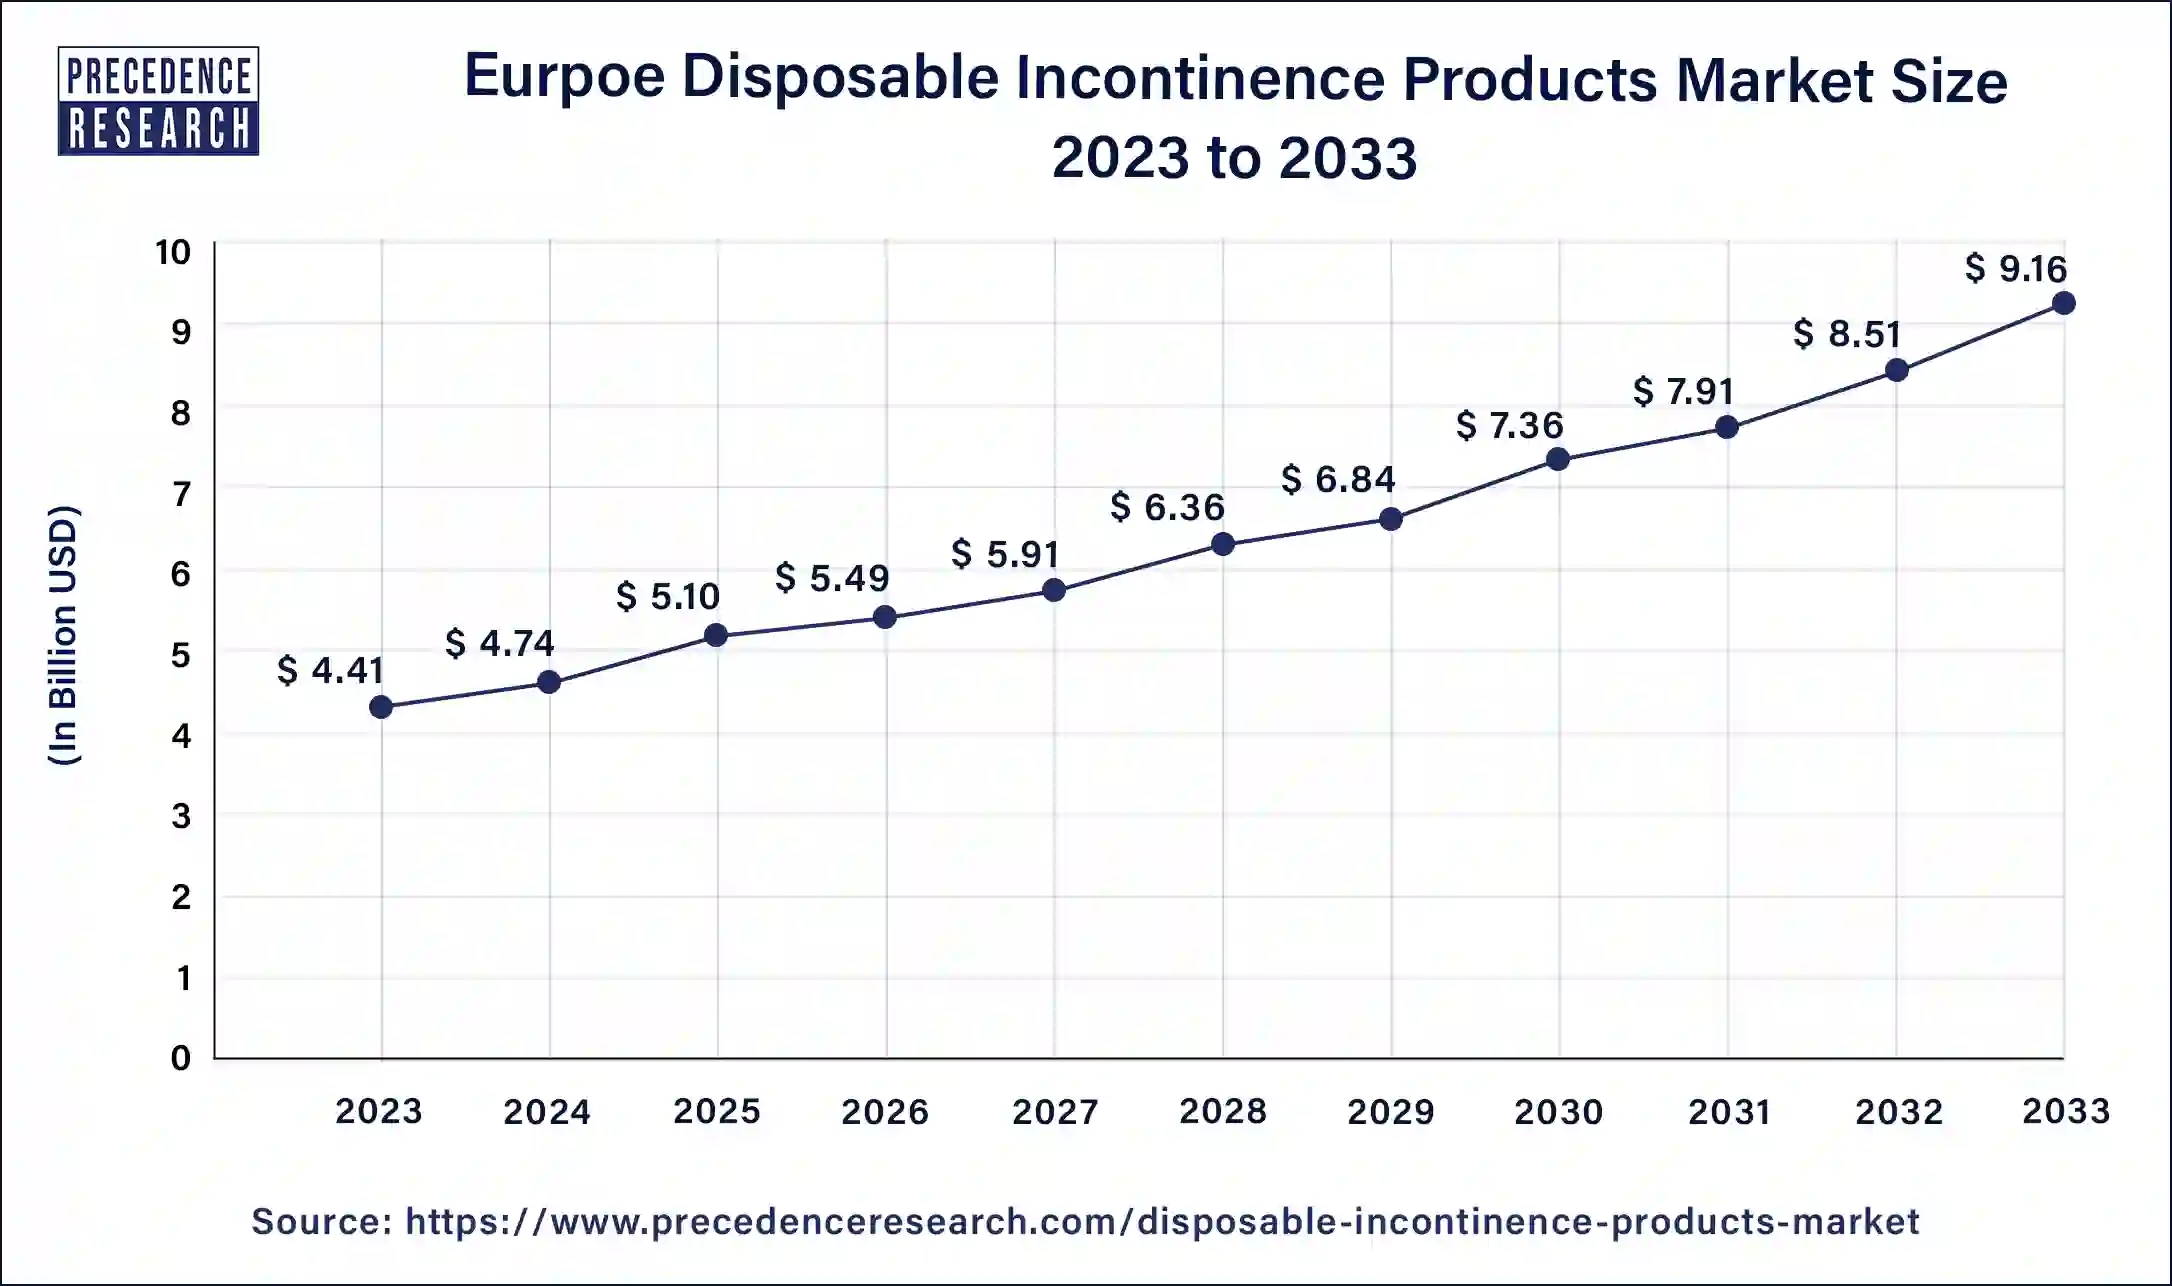 Eurpoe Disposable Incontinence Products Market Size 2024 to 2033